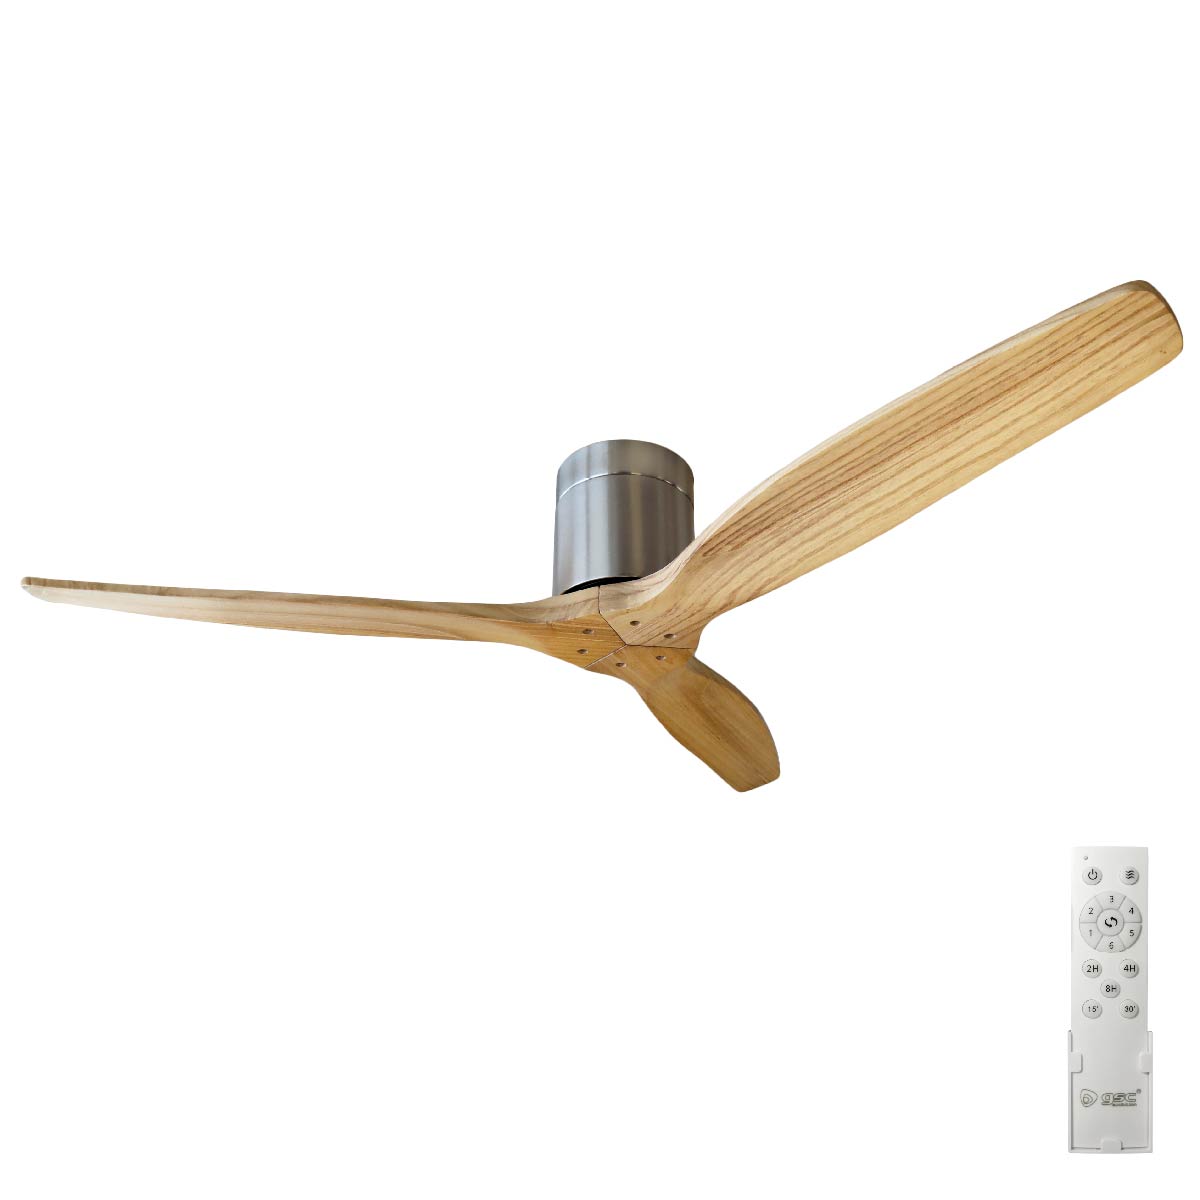 Mucari 52' DC ceiling fan with remote control CCT 3 blades Nickel/Wood